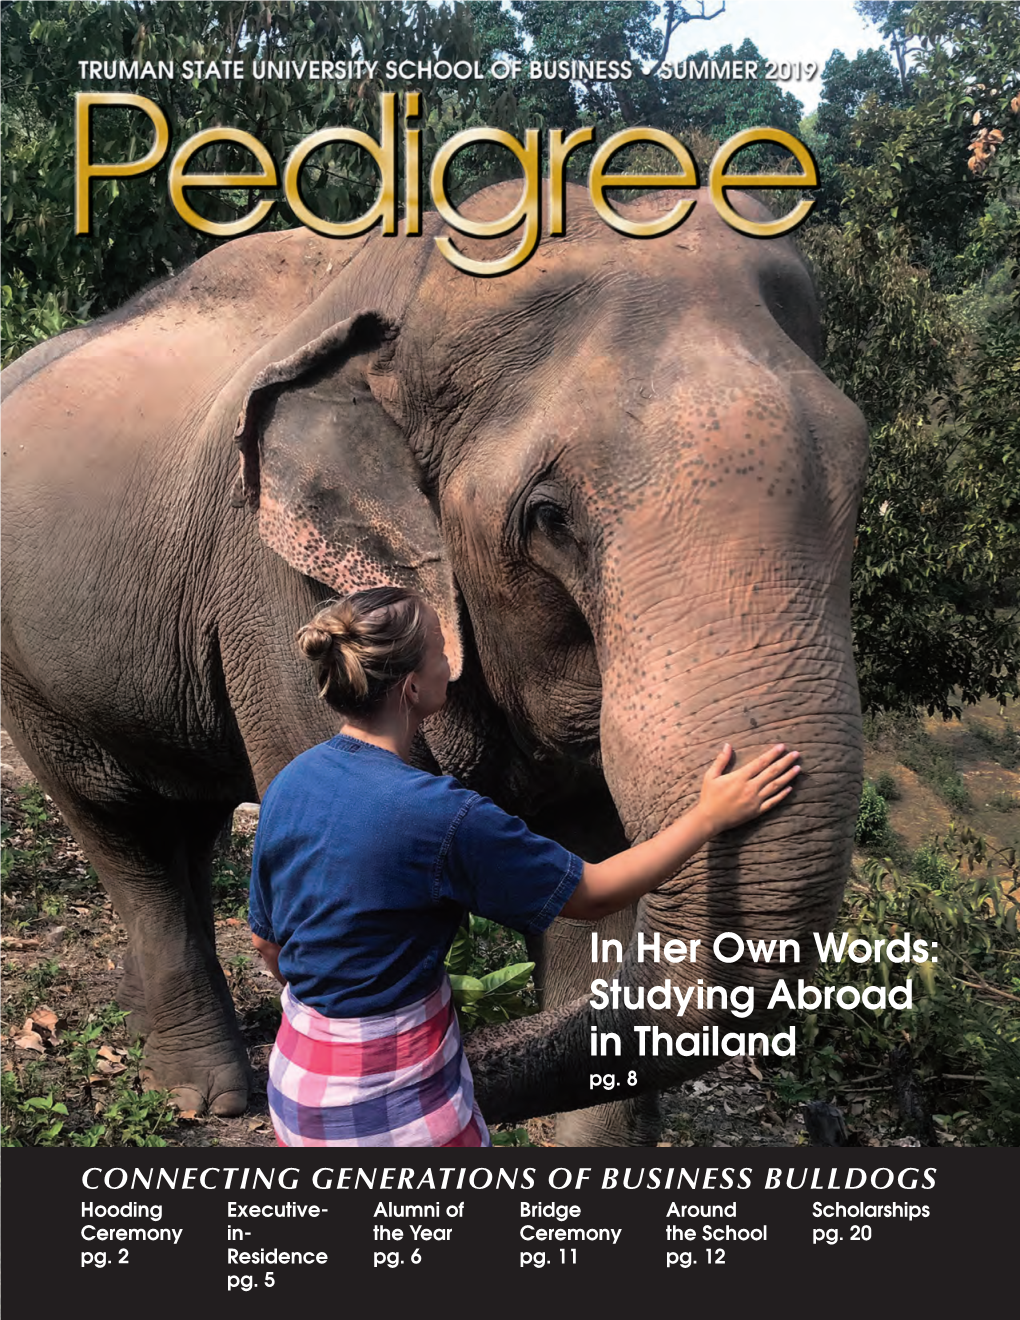 In Her Own Words: Studying Abroad in Thailand Pg